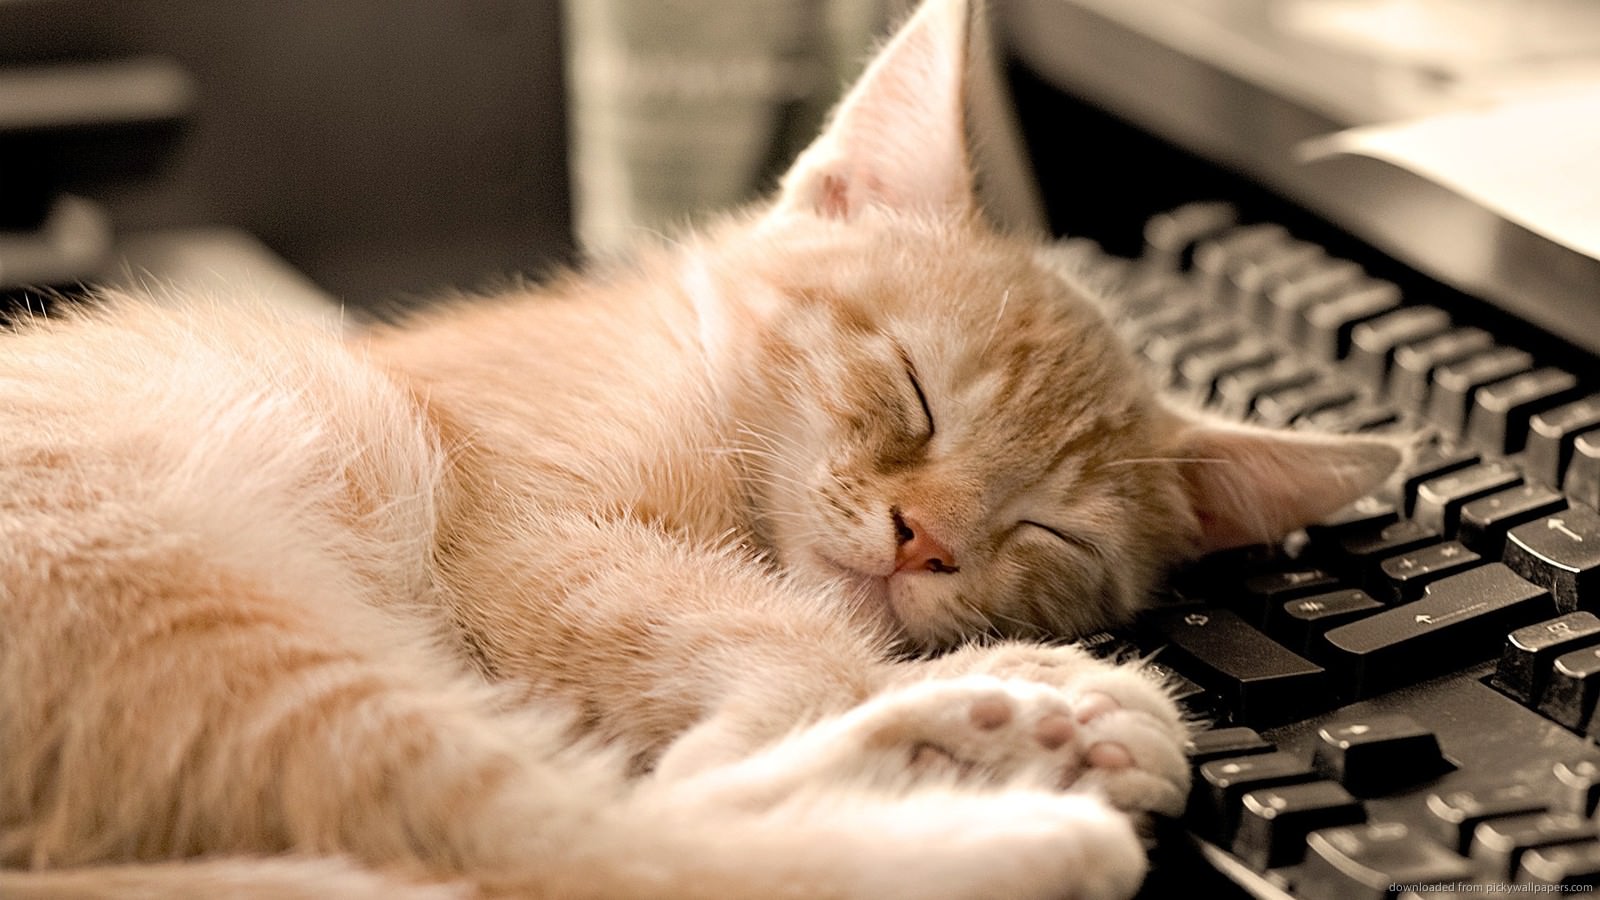 10 Interesting Facts About Napping – #5 is Pretty Convincing